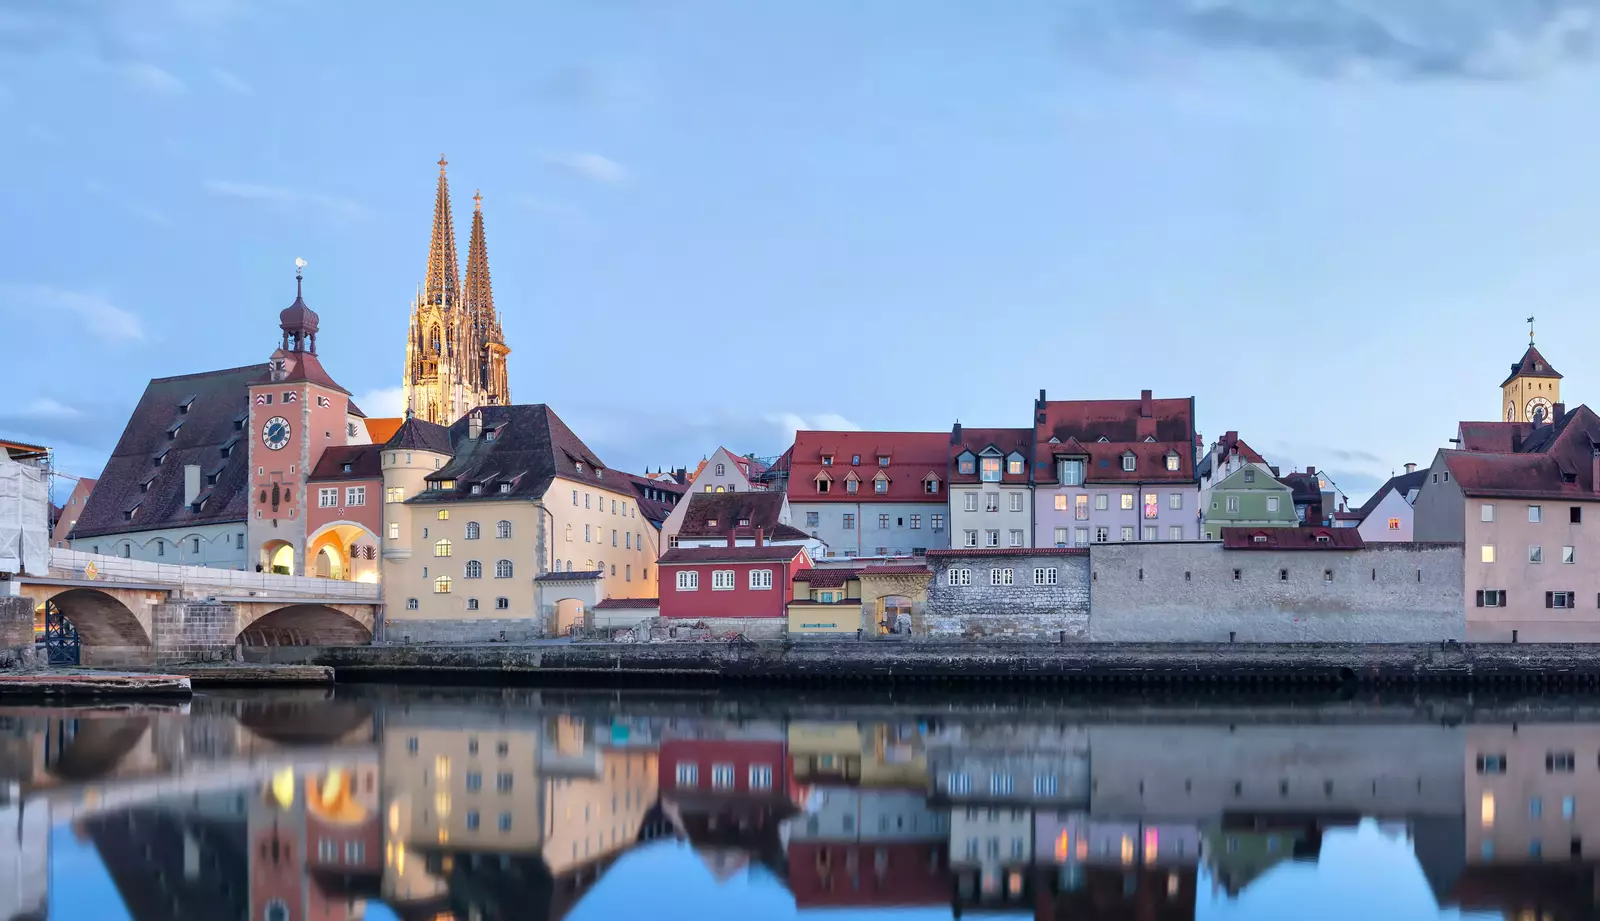 Panorama of the old town Regensburg